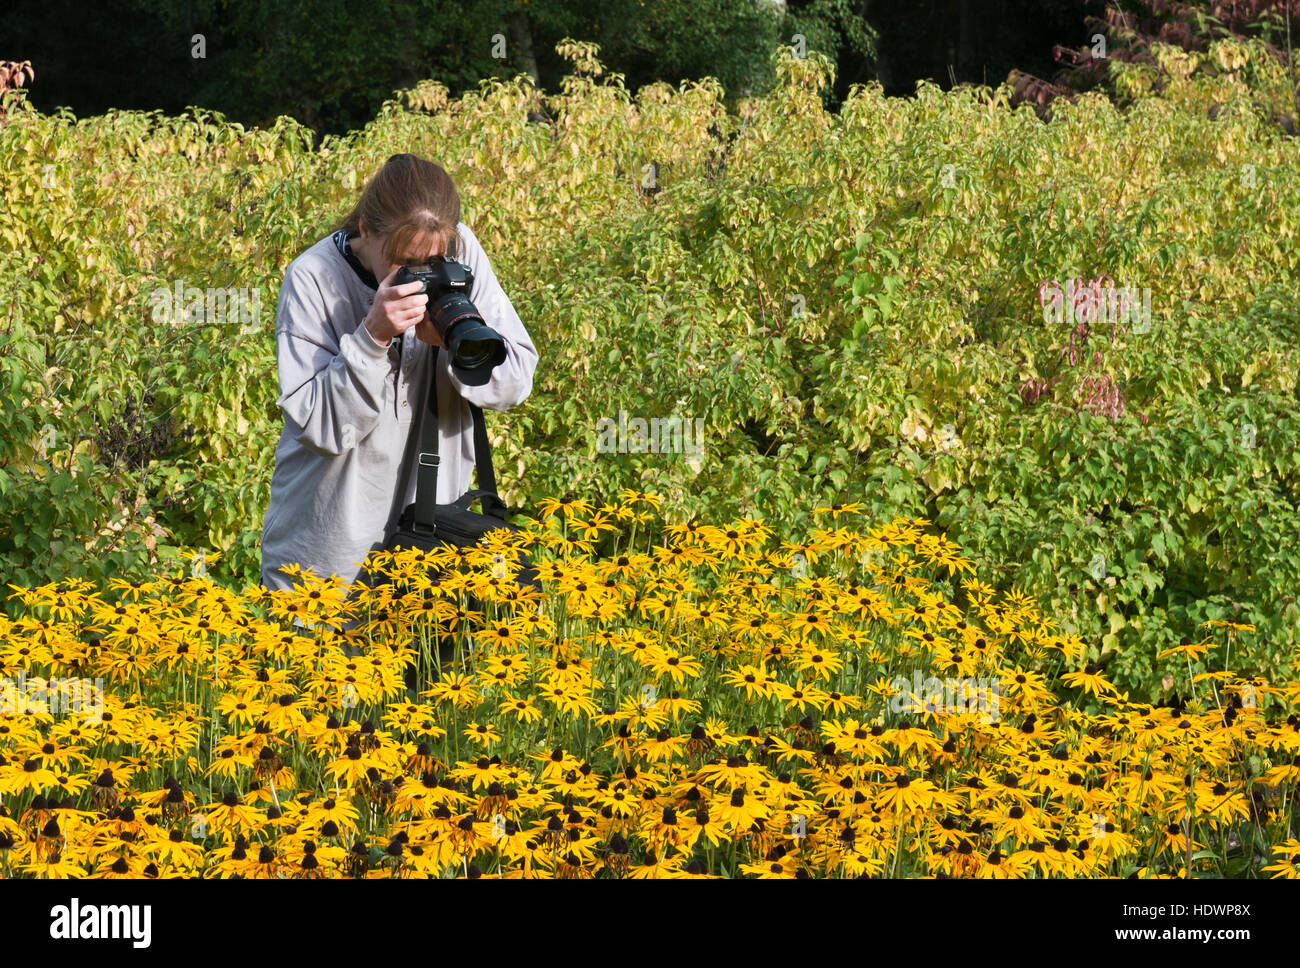 Model released image of a keen photographer taking pictures of flowers in Brookwood Cemetery, Surrey. Image taken September 2013 Stock Photo